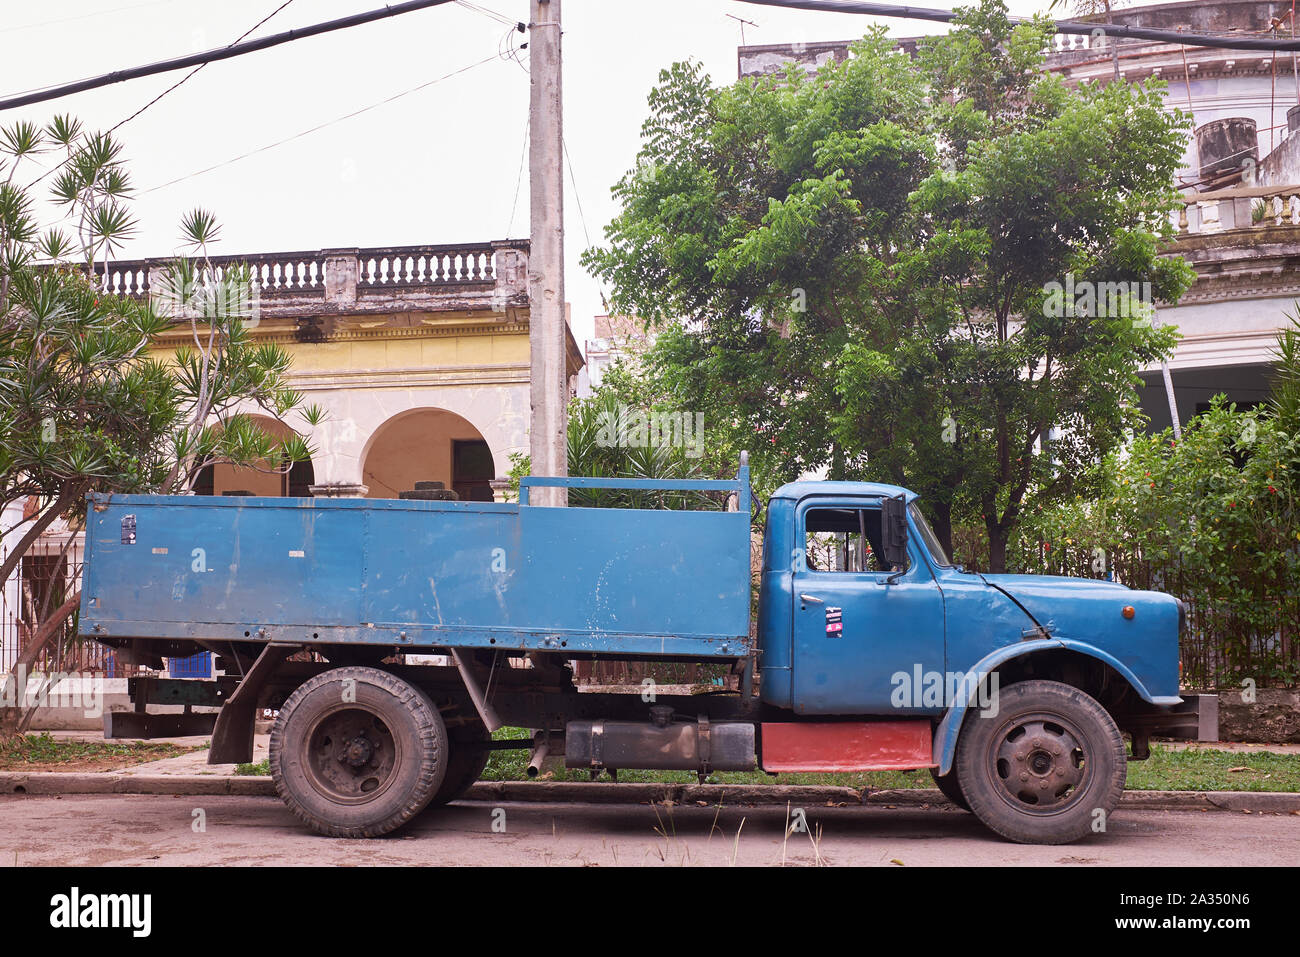 Classic cars, taxis, trucks and motorcycles are abundant on the streets of Trinidad and Havana, Cuba Stock Photo